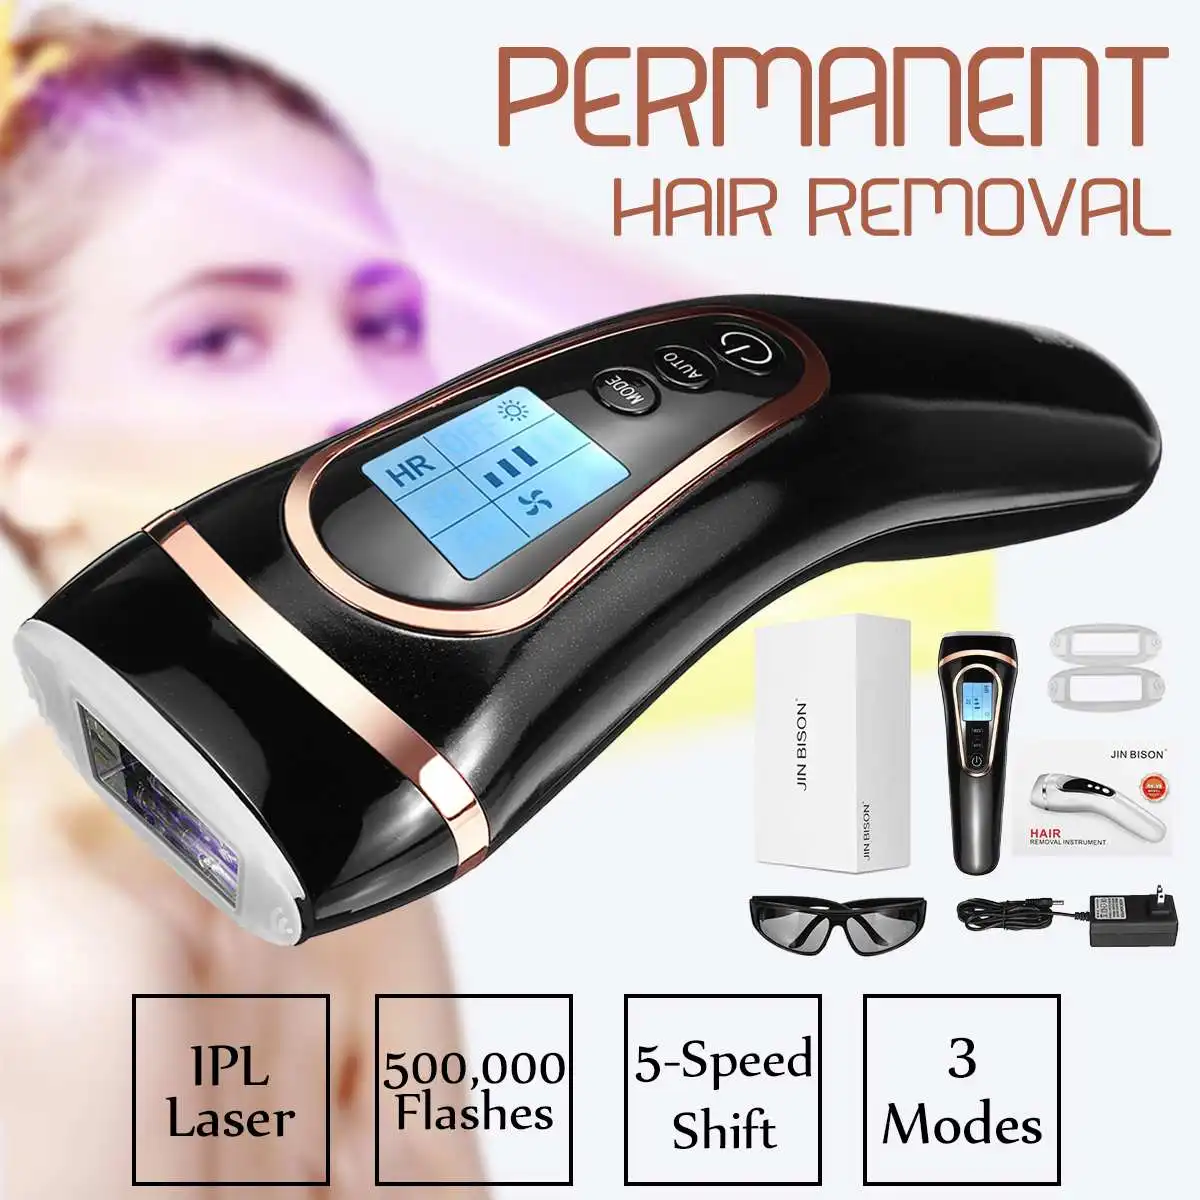 

5 Levels IPL Laser Hair Removal Device Permanent Hair Removal 500000 pulsed IPL laser Epilator Armpit Hair Removal Machine